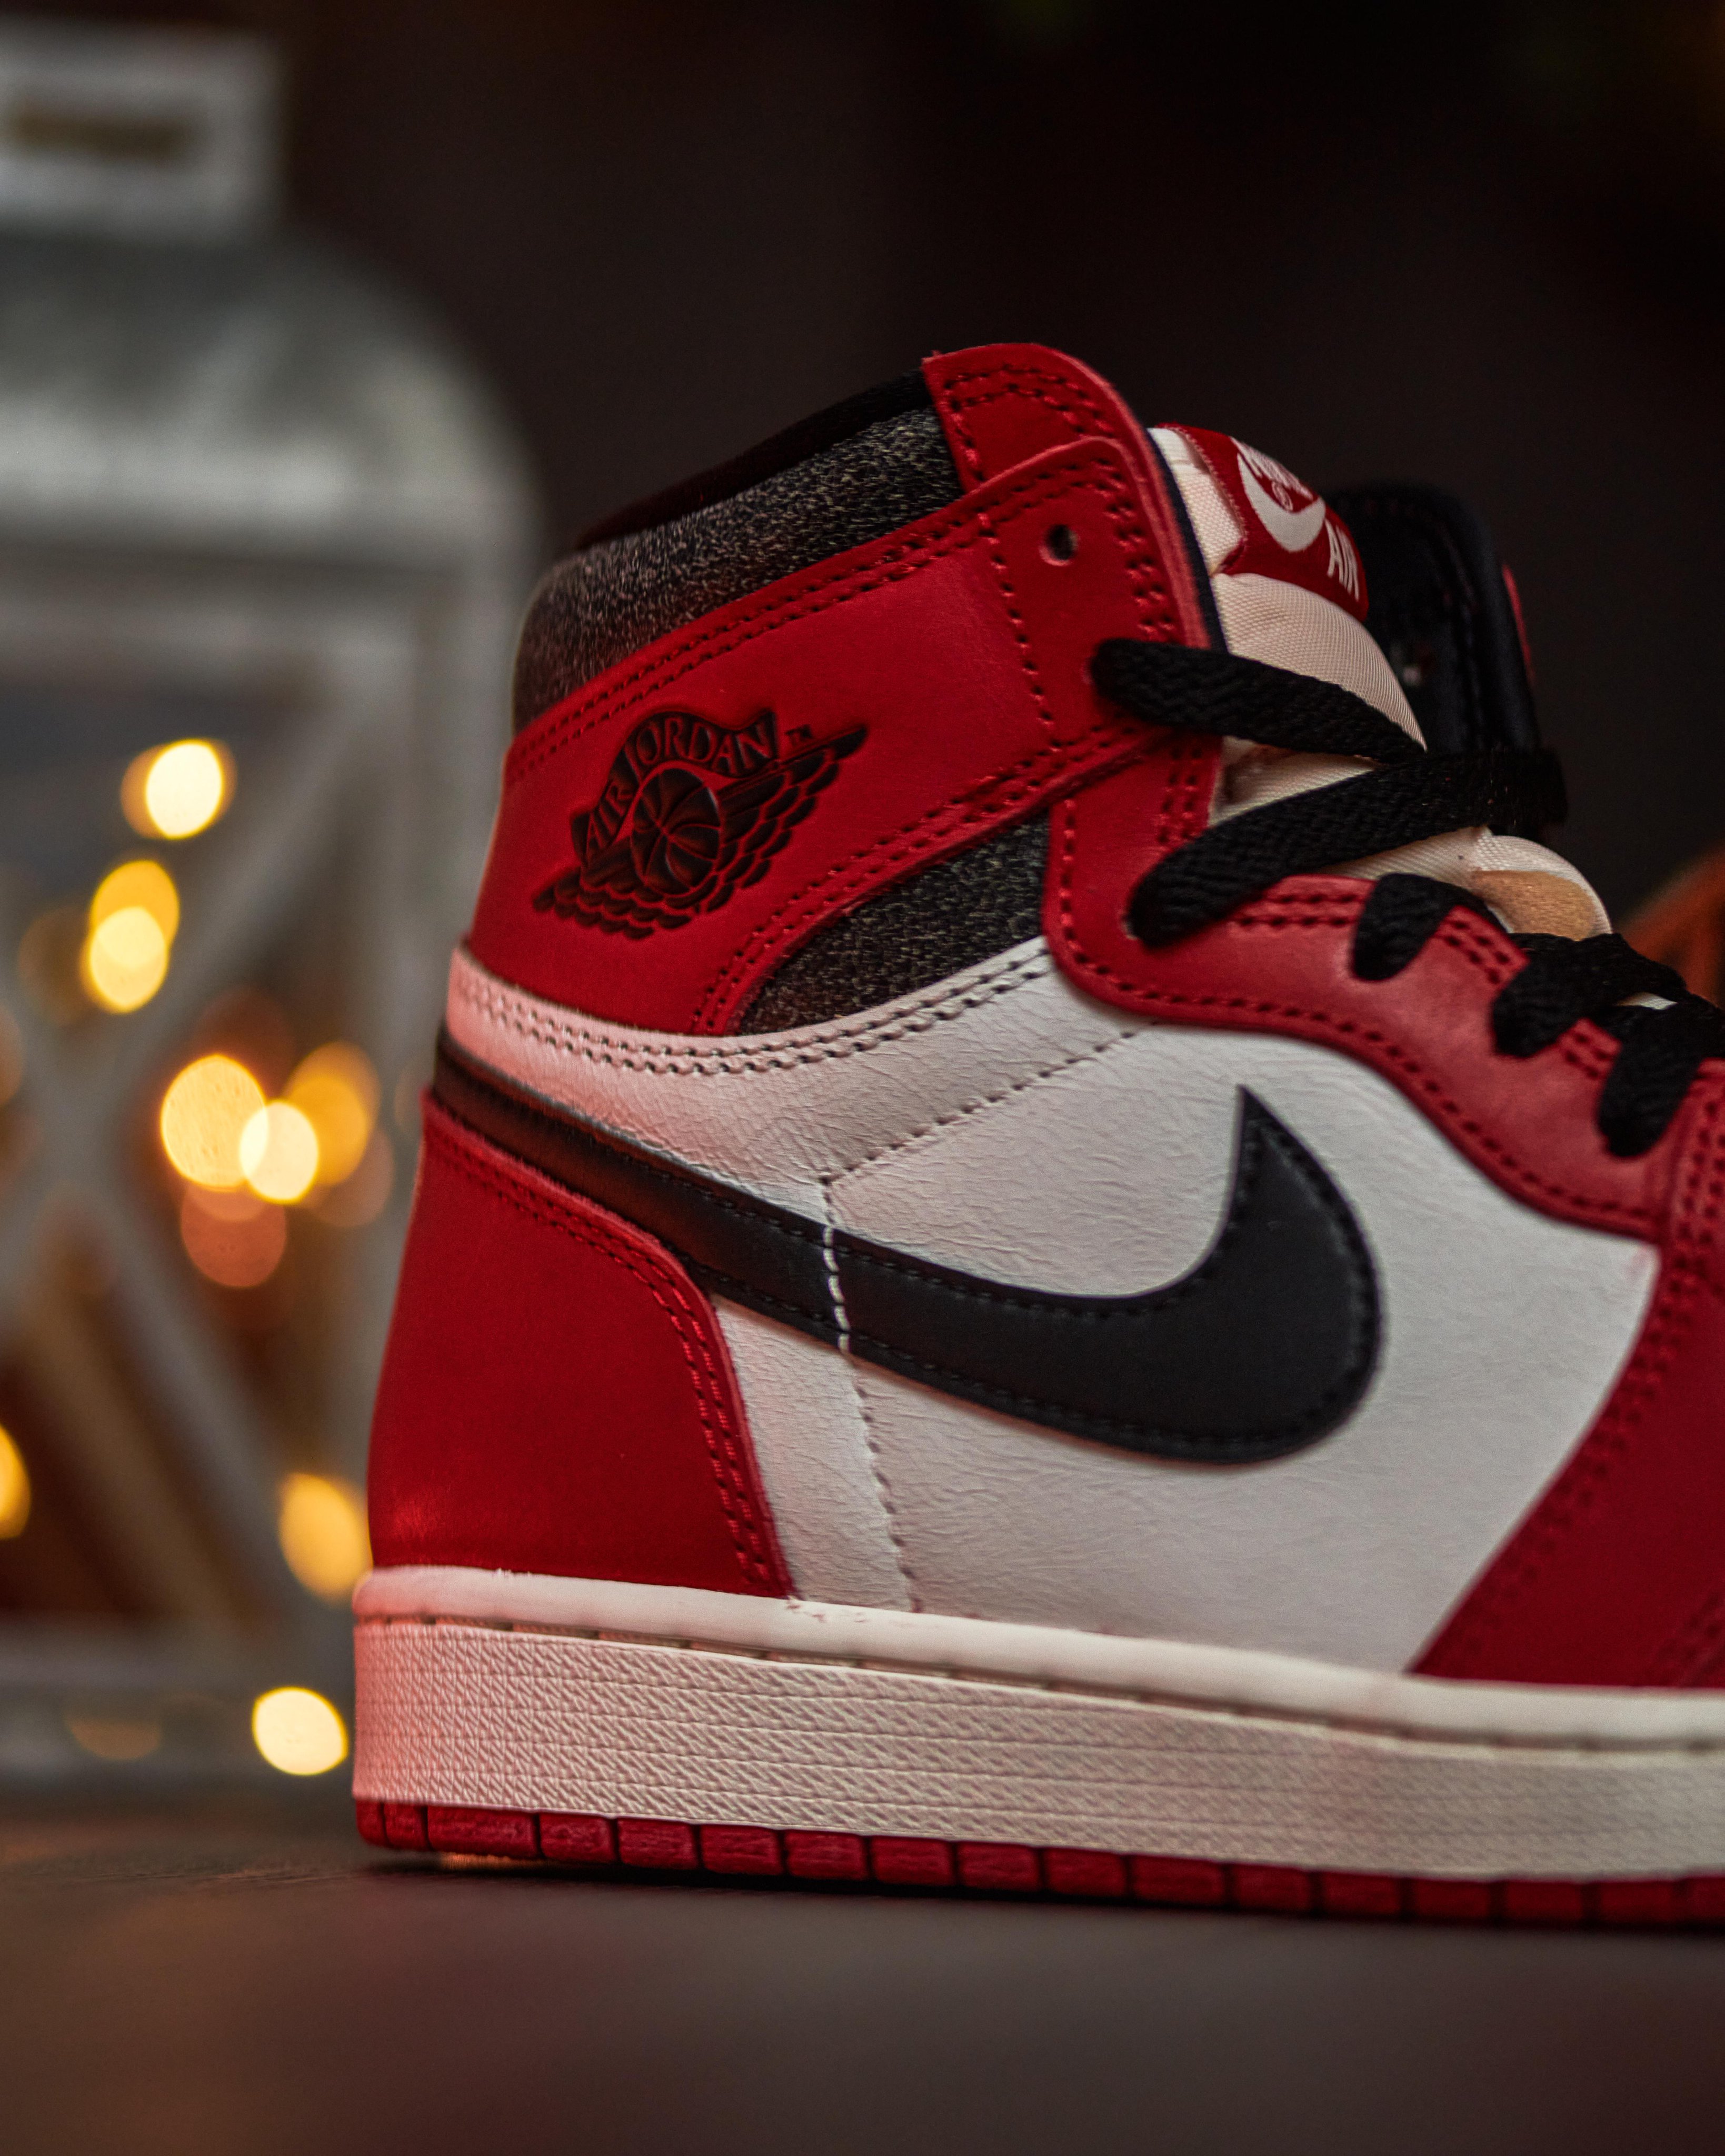 Foot Locker on X: "A time capsule from the back of the stockroom. The Jordan  Retro 1 High 'Lost and Found' is coming to Foot Locker 11/19 in full-family  sizing. Reservations are